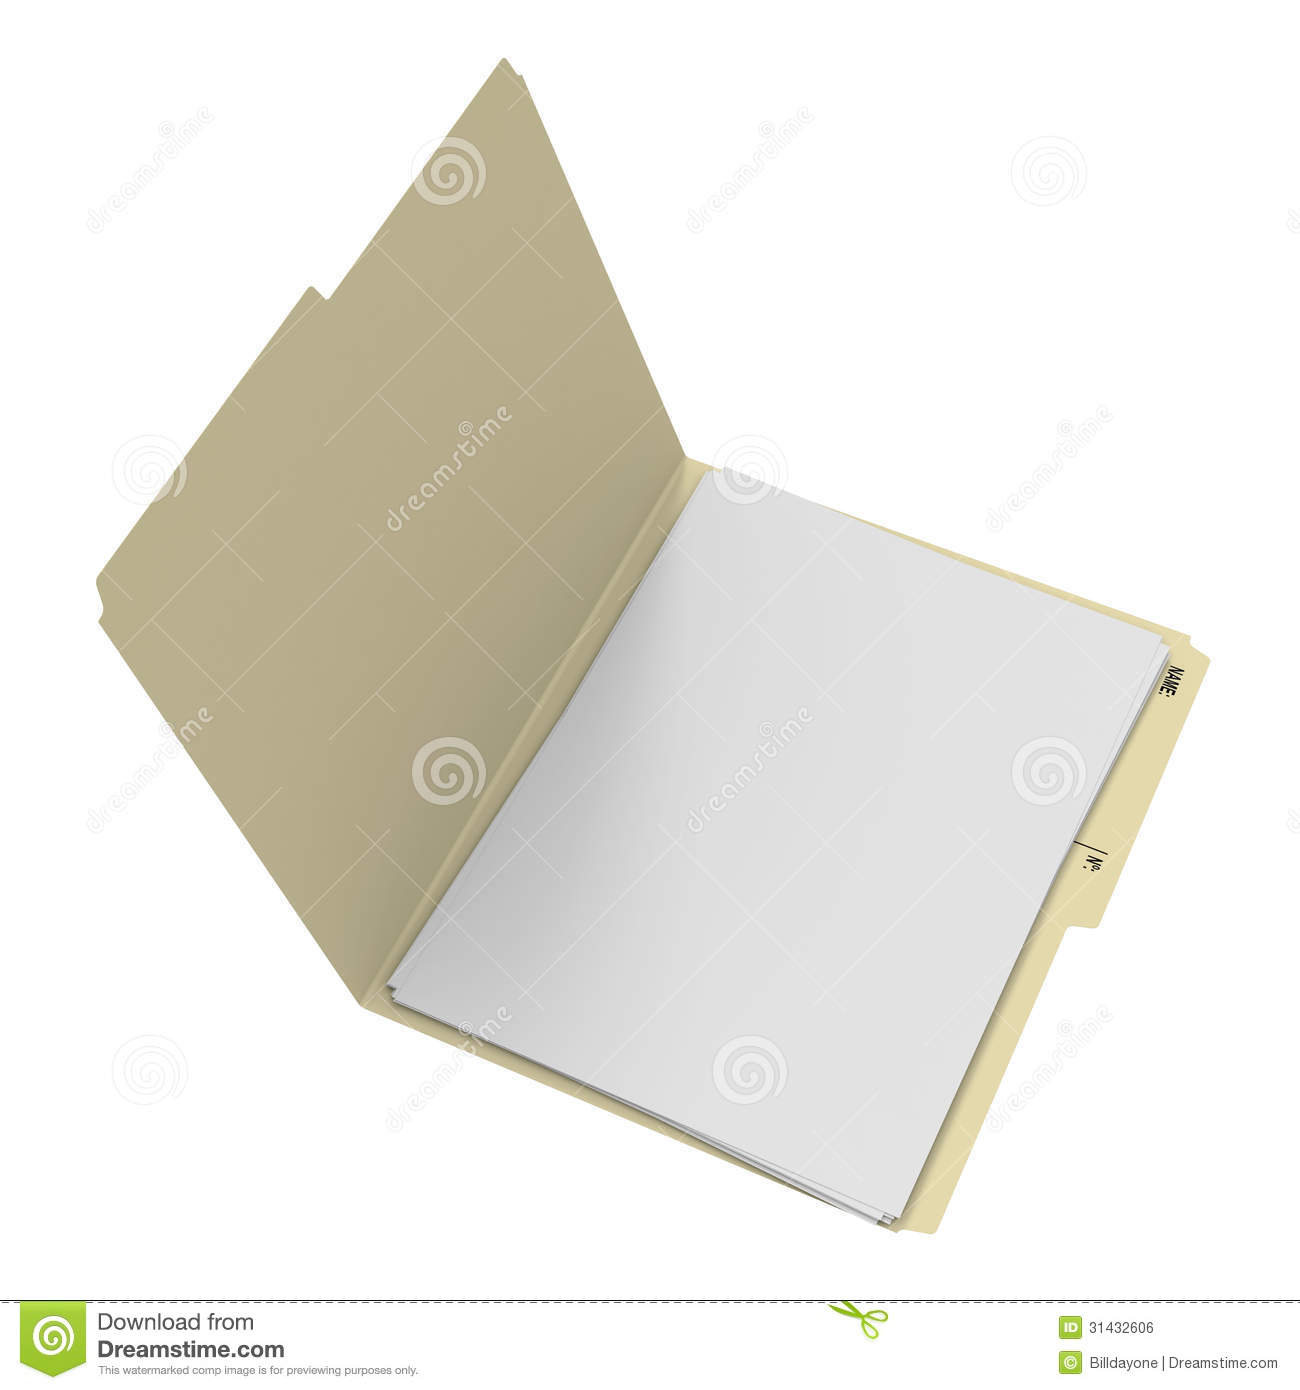 Open Office Folder With Blank Paper Royalty Free Stock Image   Image    